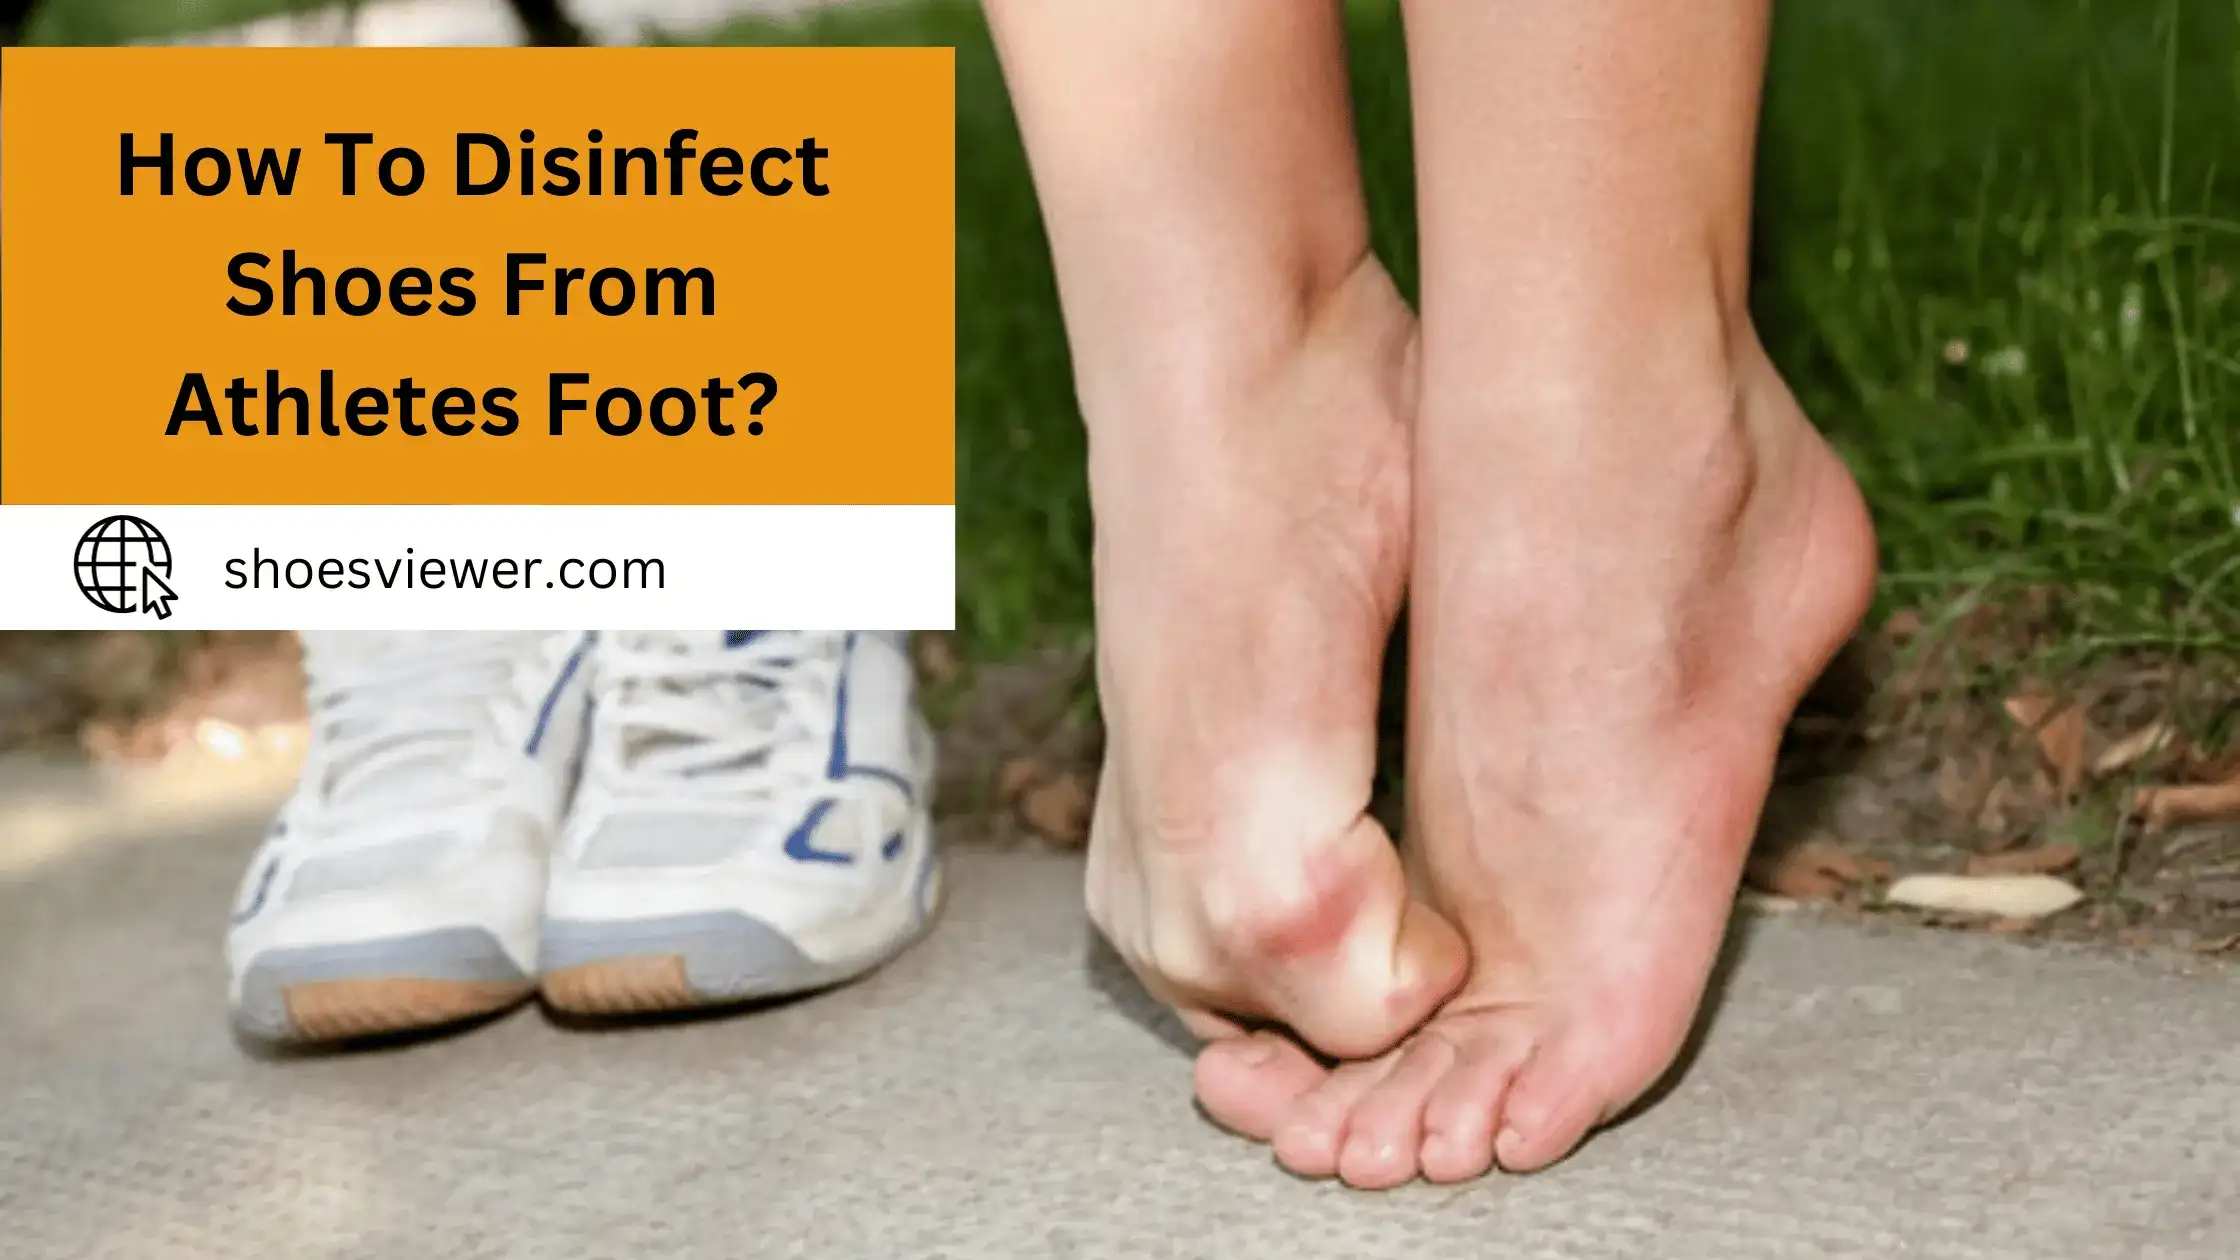 How to Disinfect Shoes From Athletes Foot? Quick Solutions!